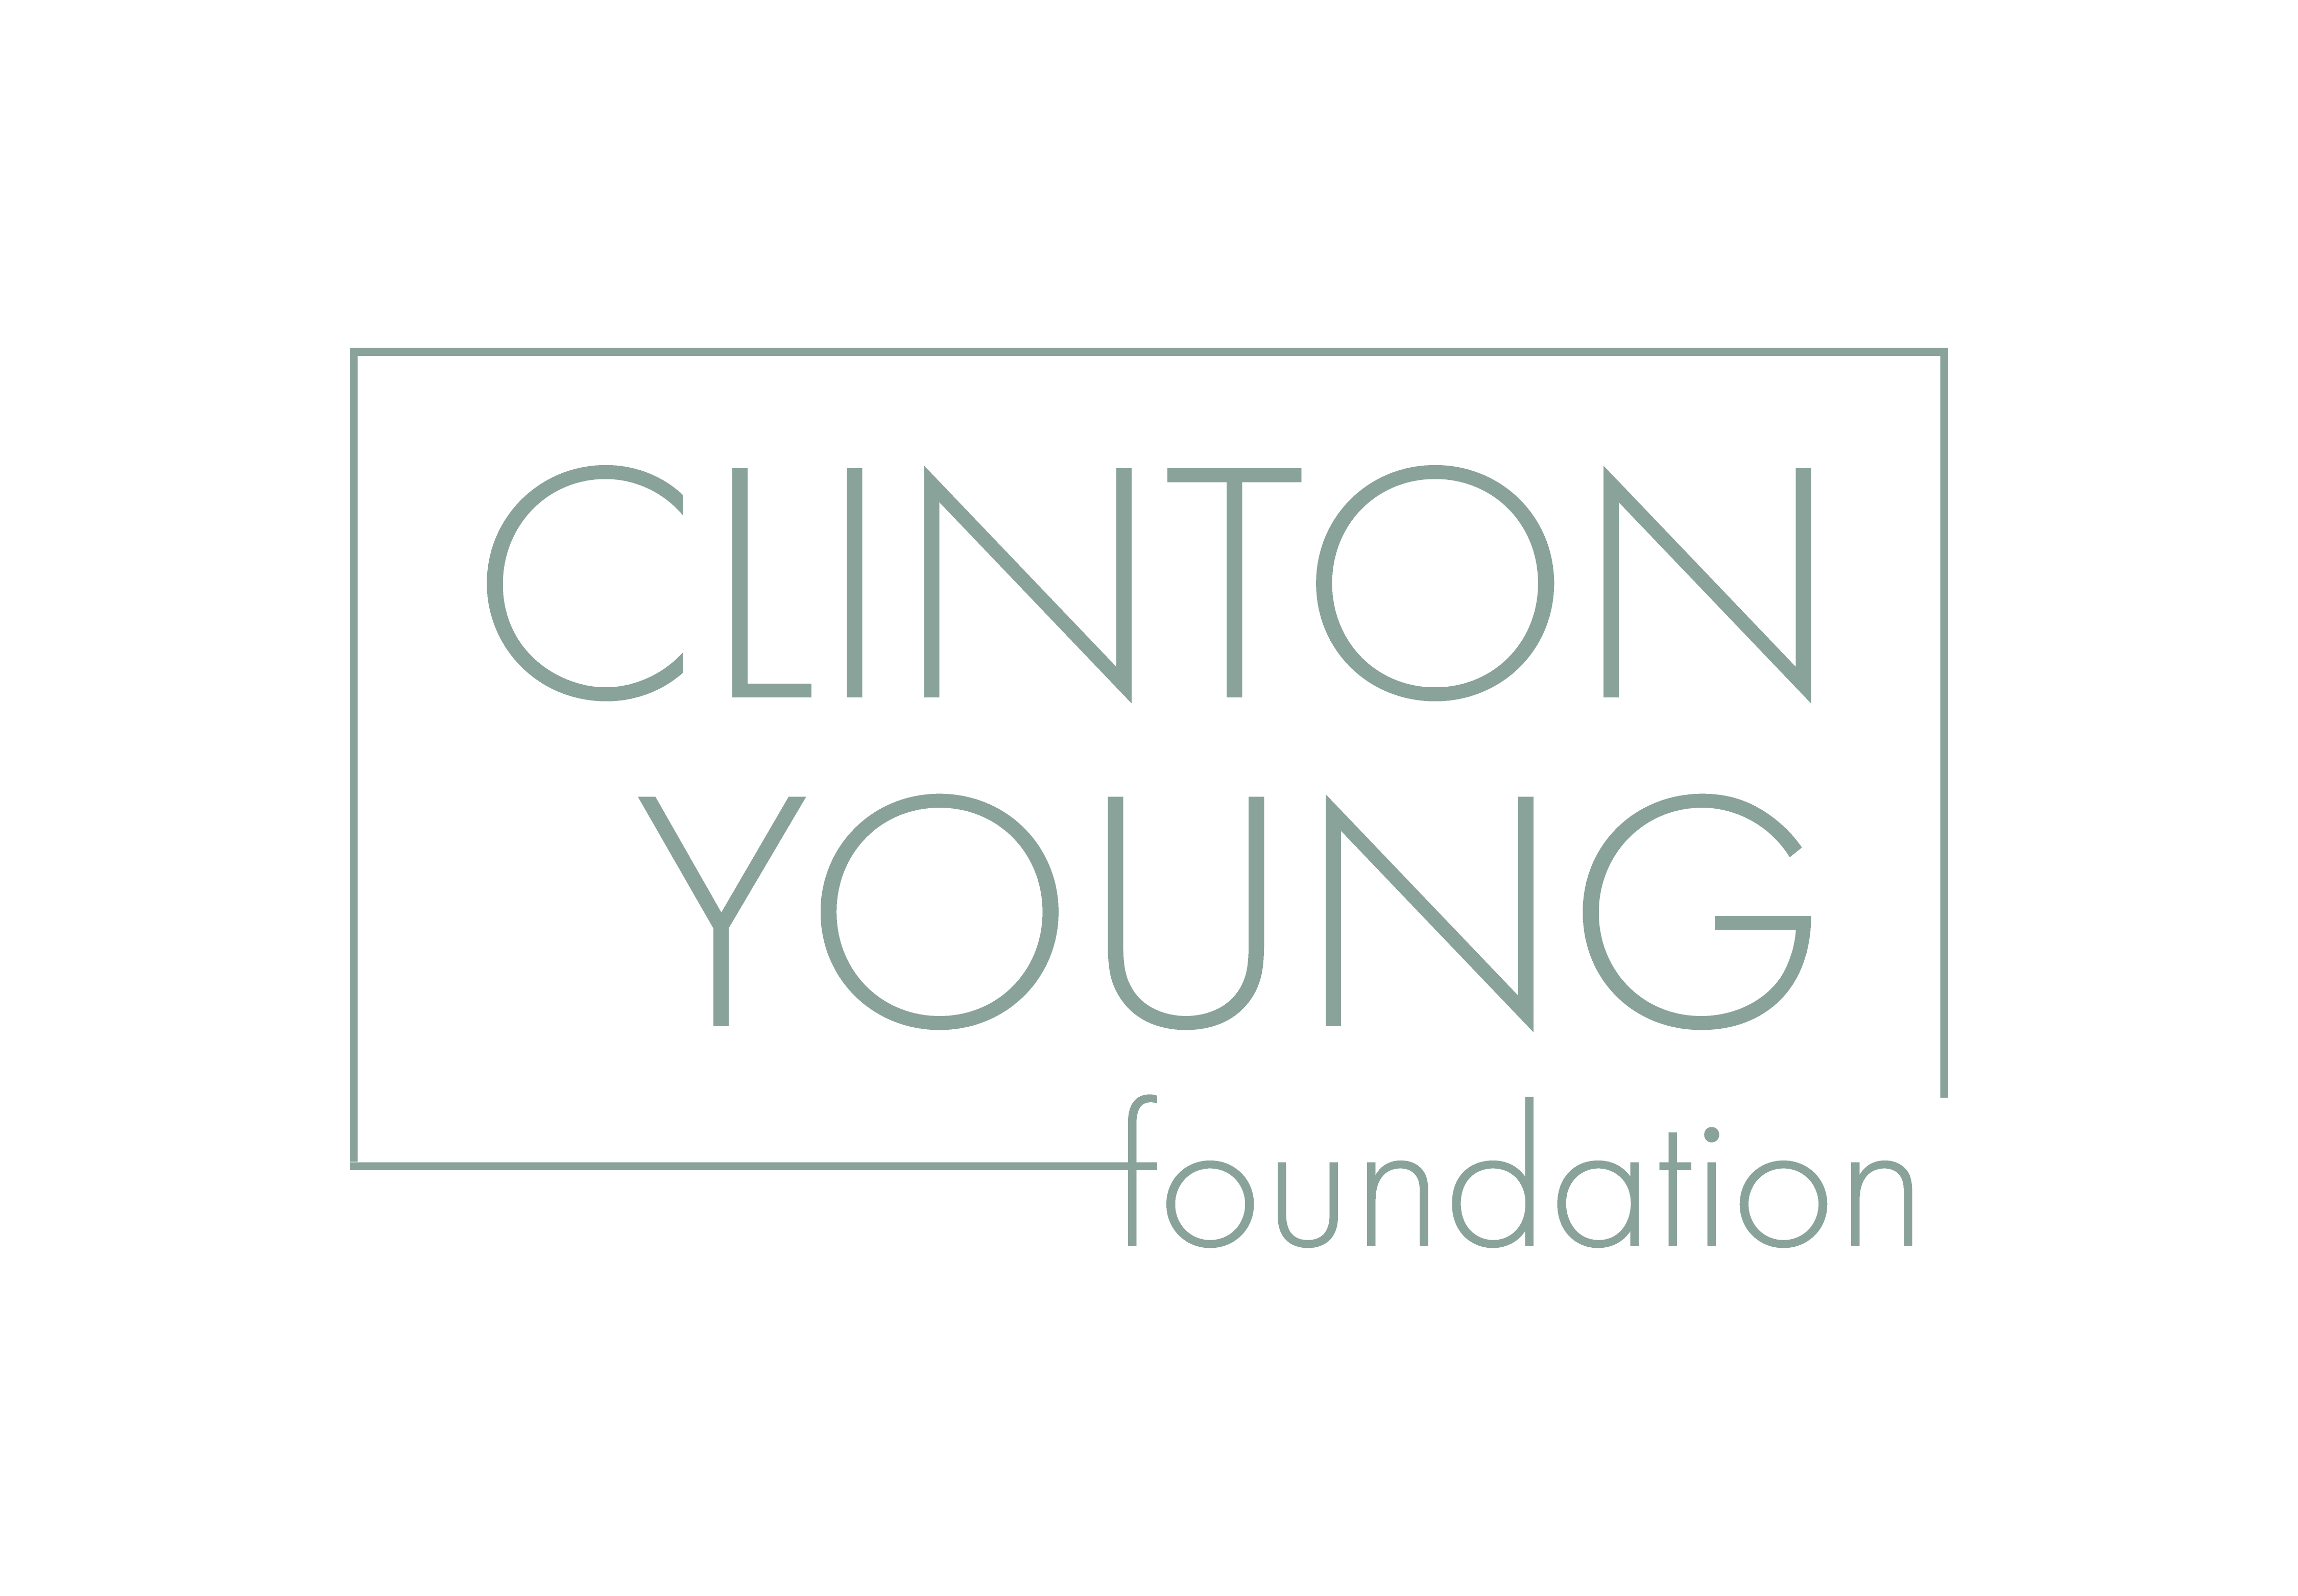 Clinton Young Foundation